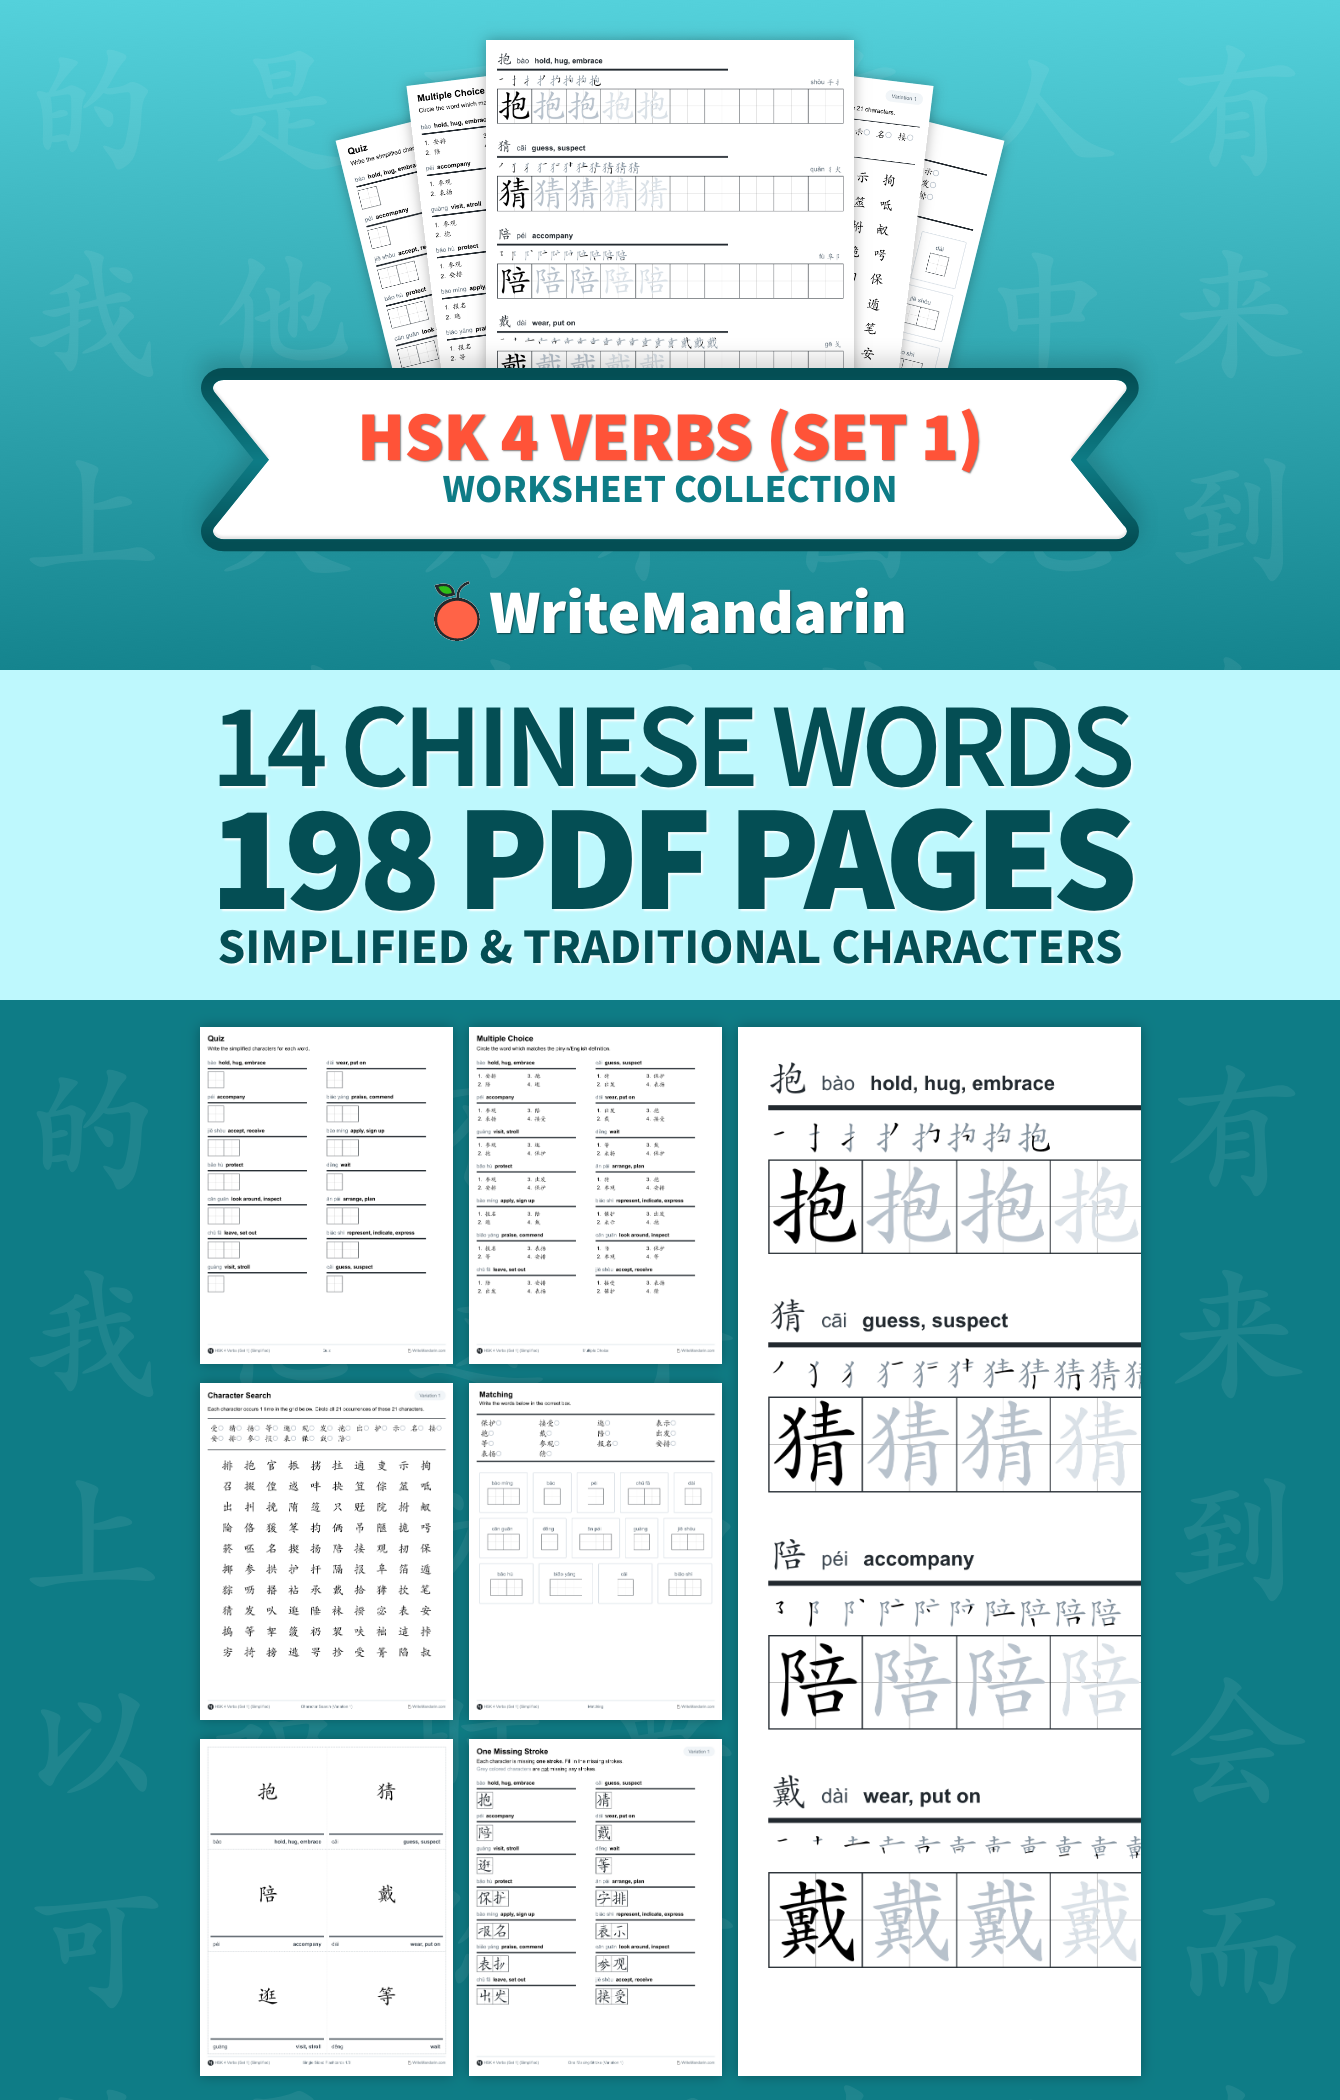 Preview image of HSK 4 Verbs (Set 1) worksheet collection